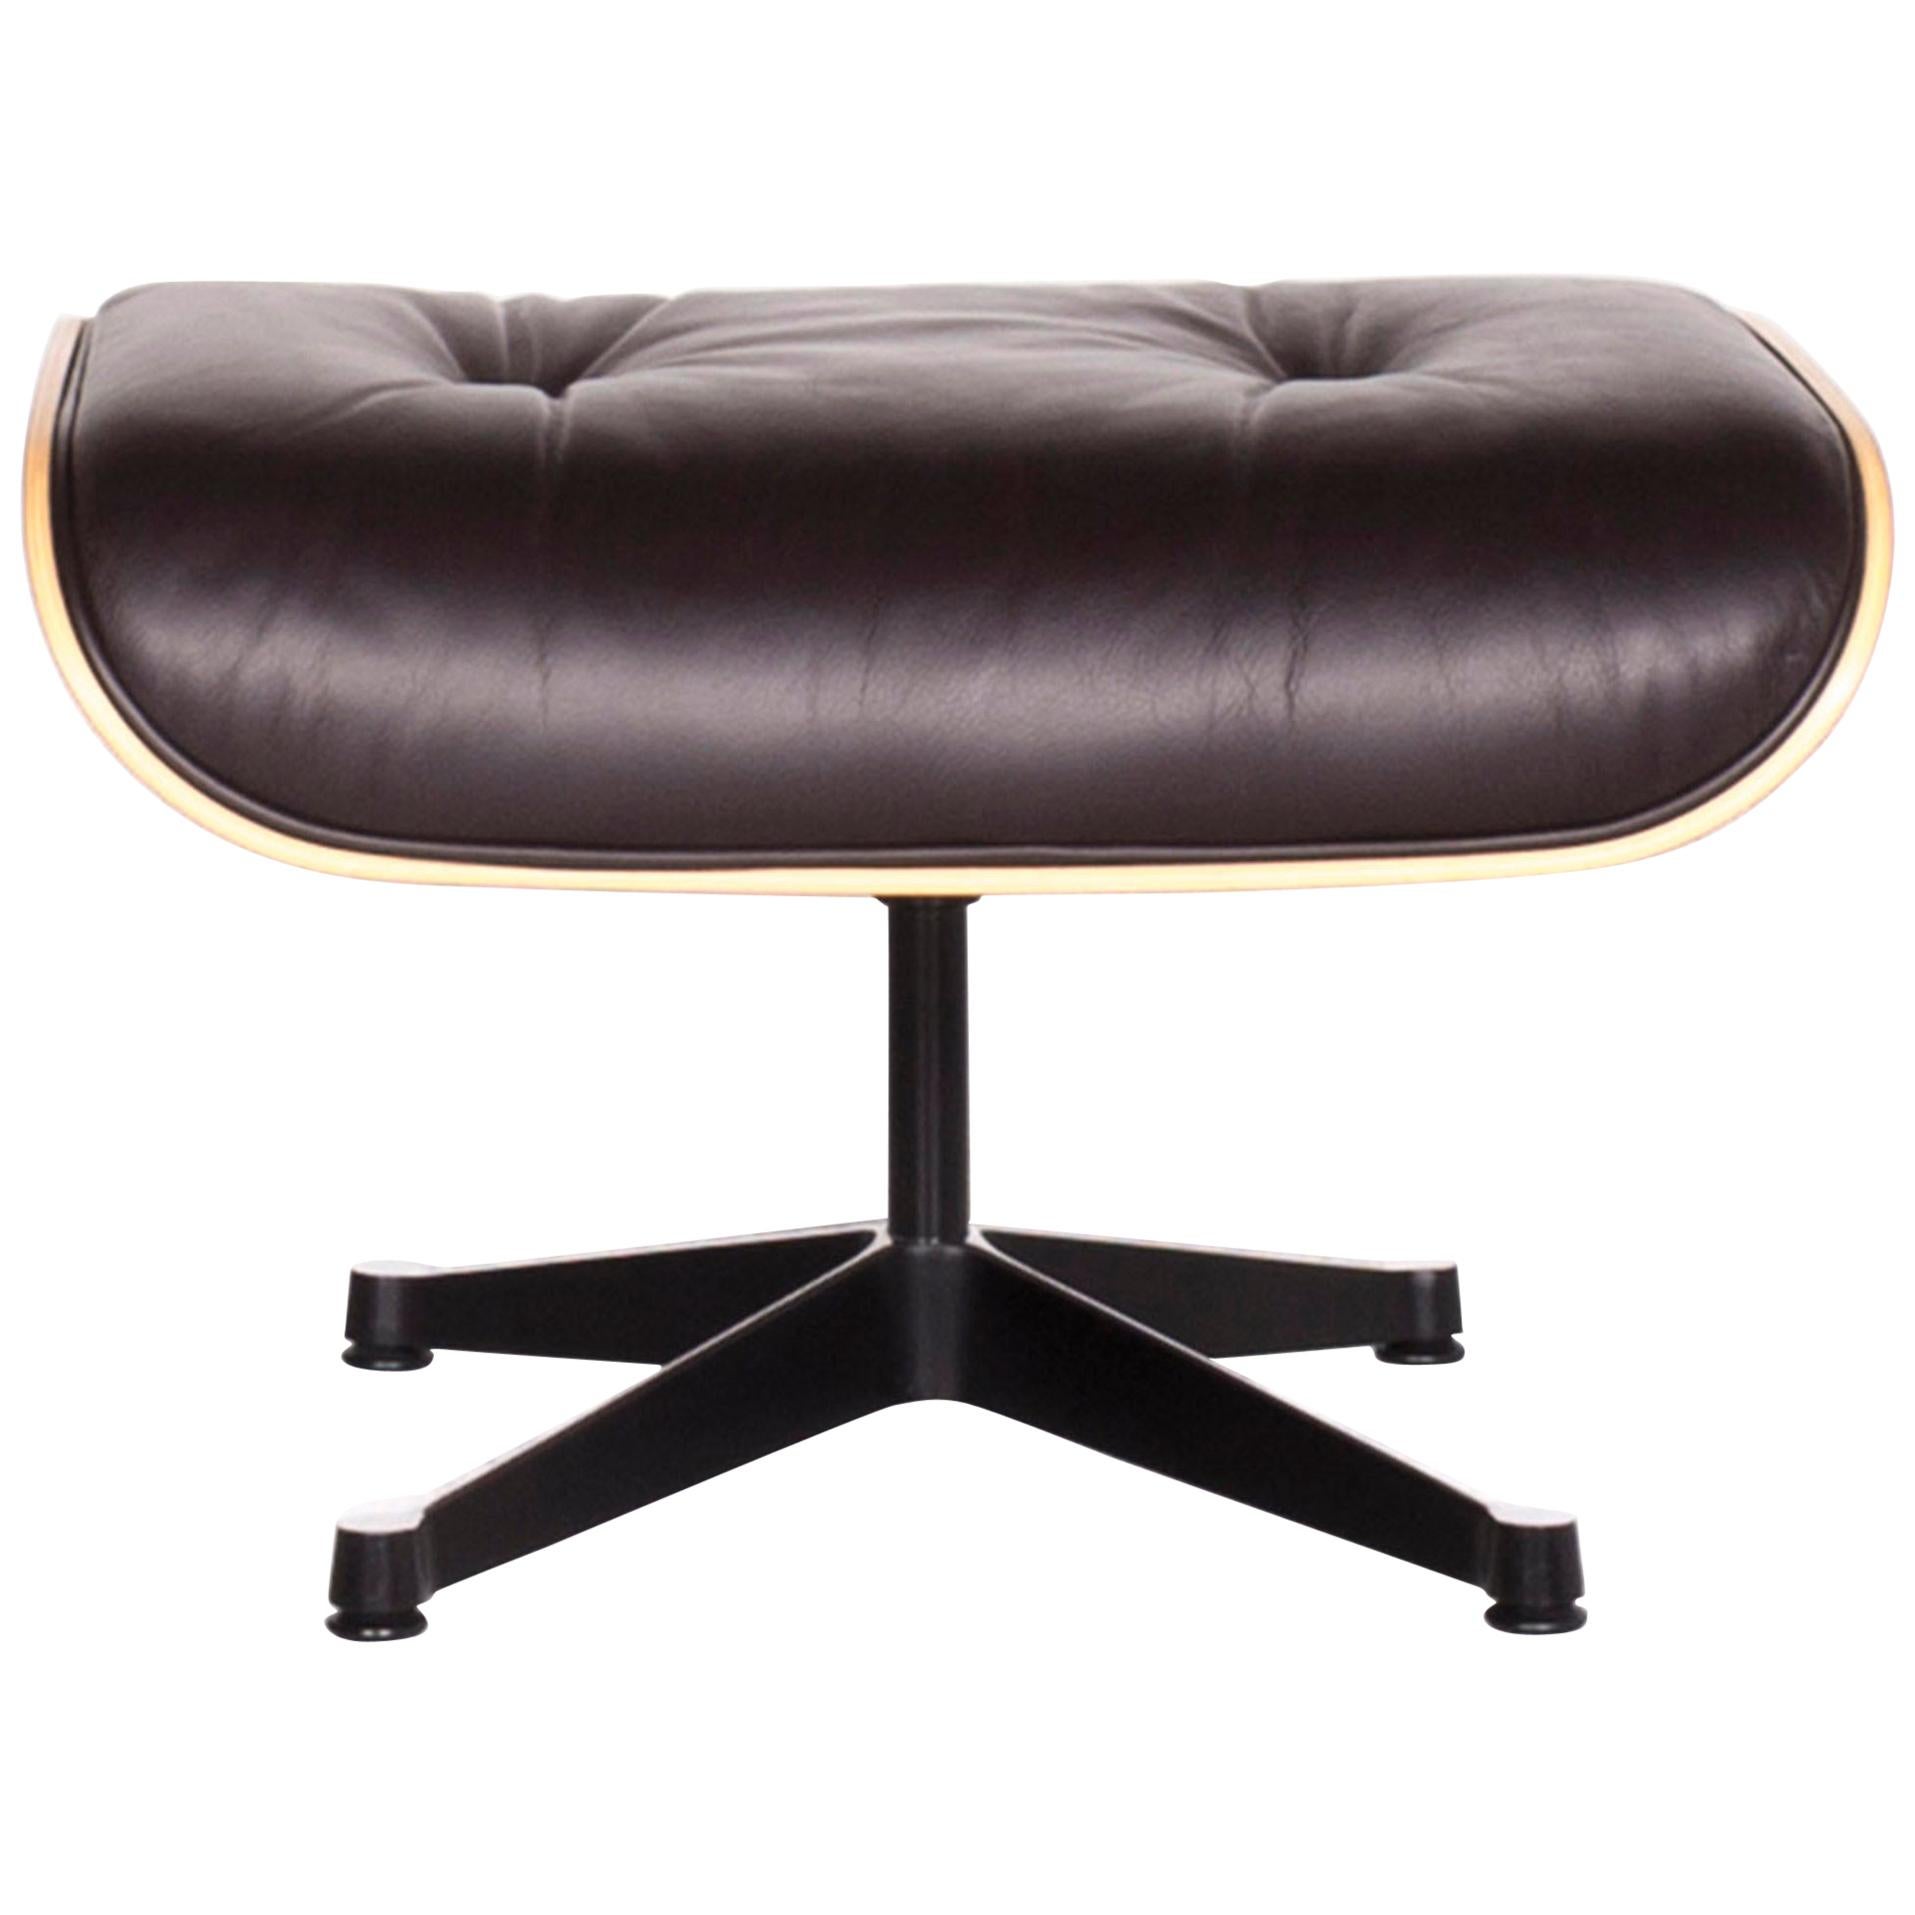 Vitra Eames Lounge Chair Leather Stool Brown Charles & Ray Eames Chair For Sale